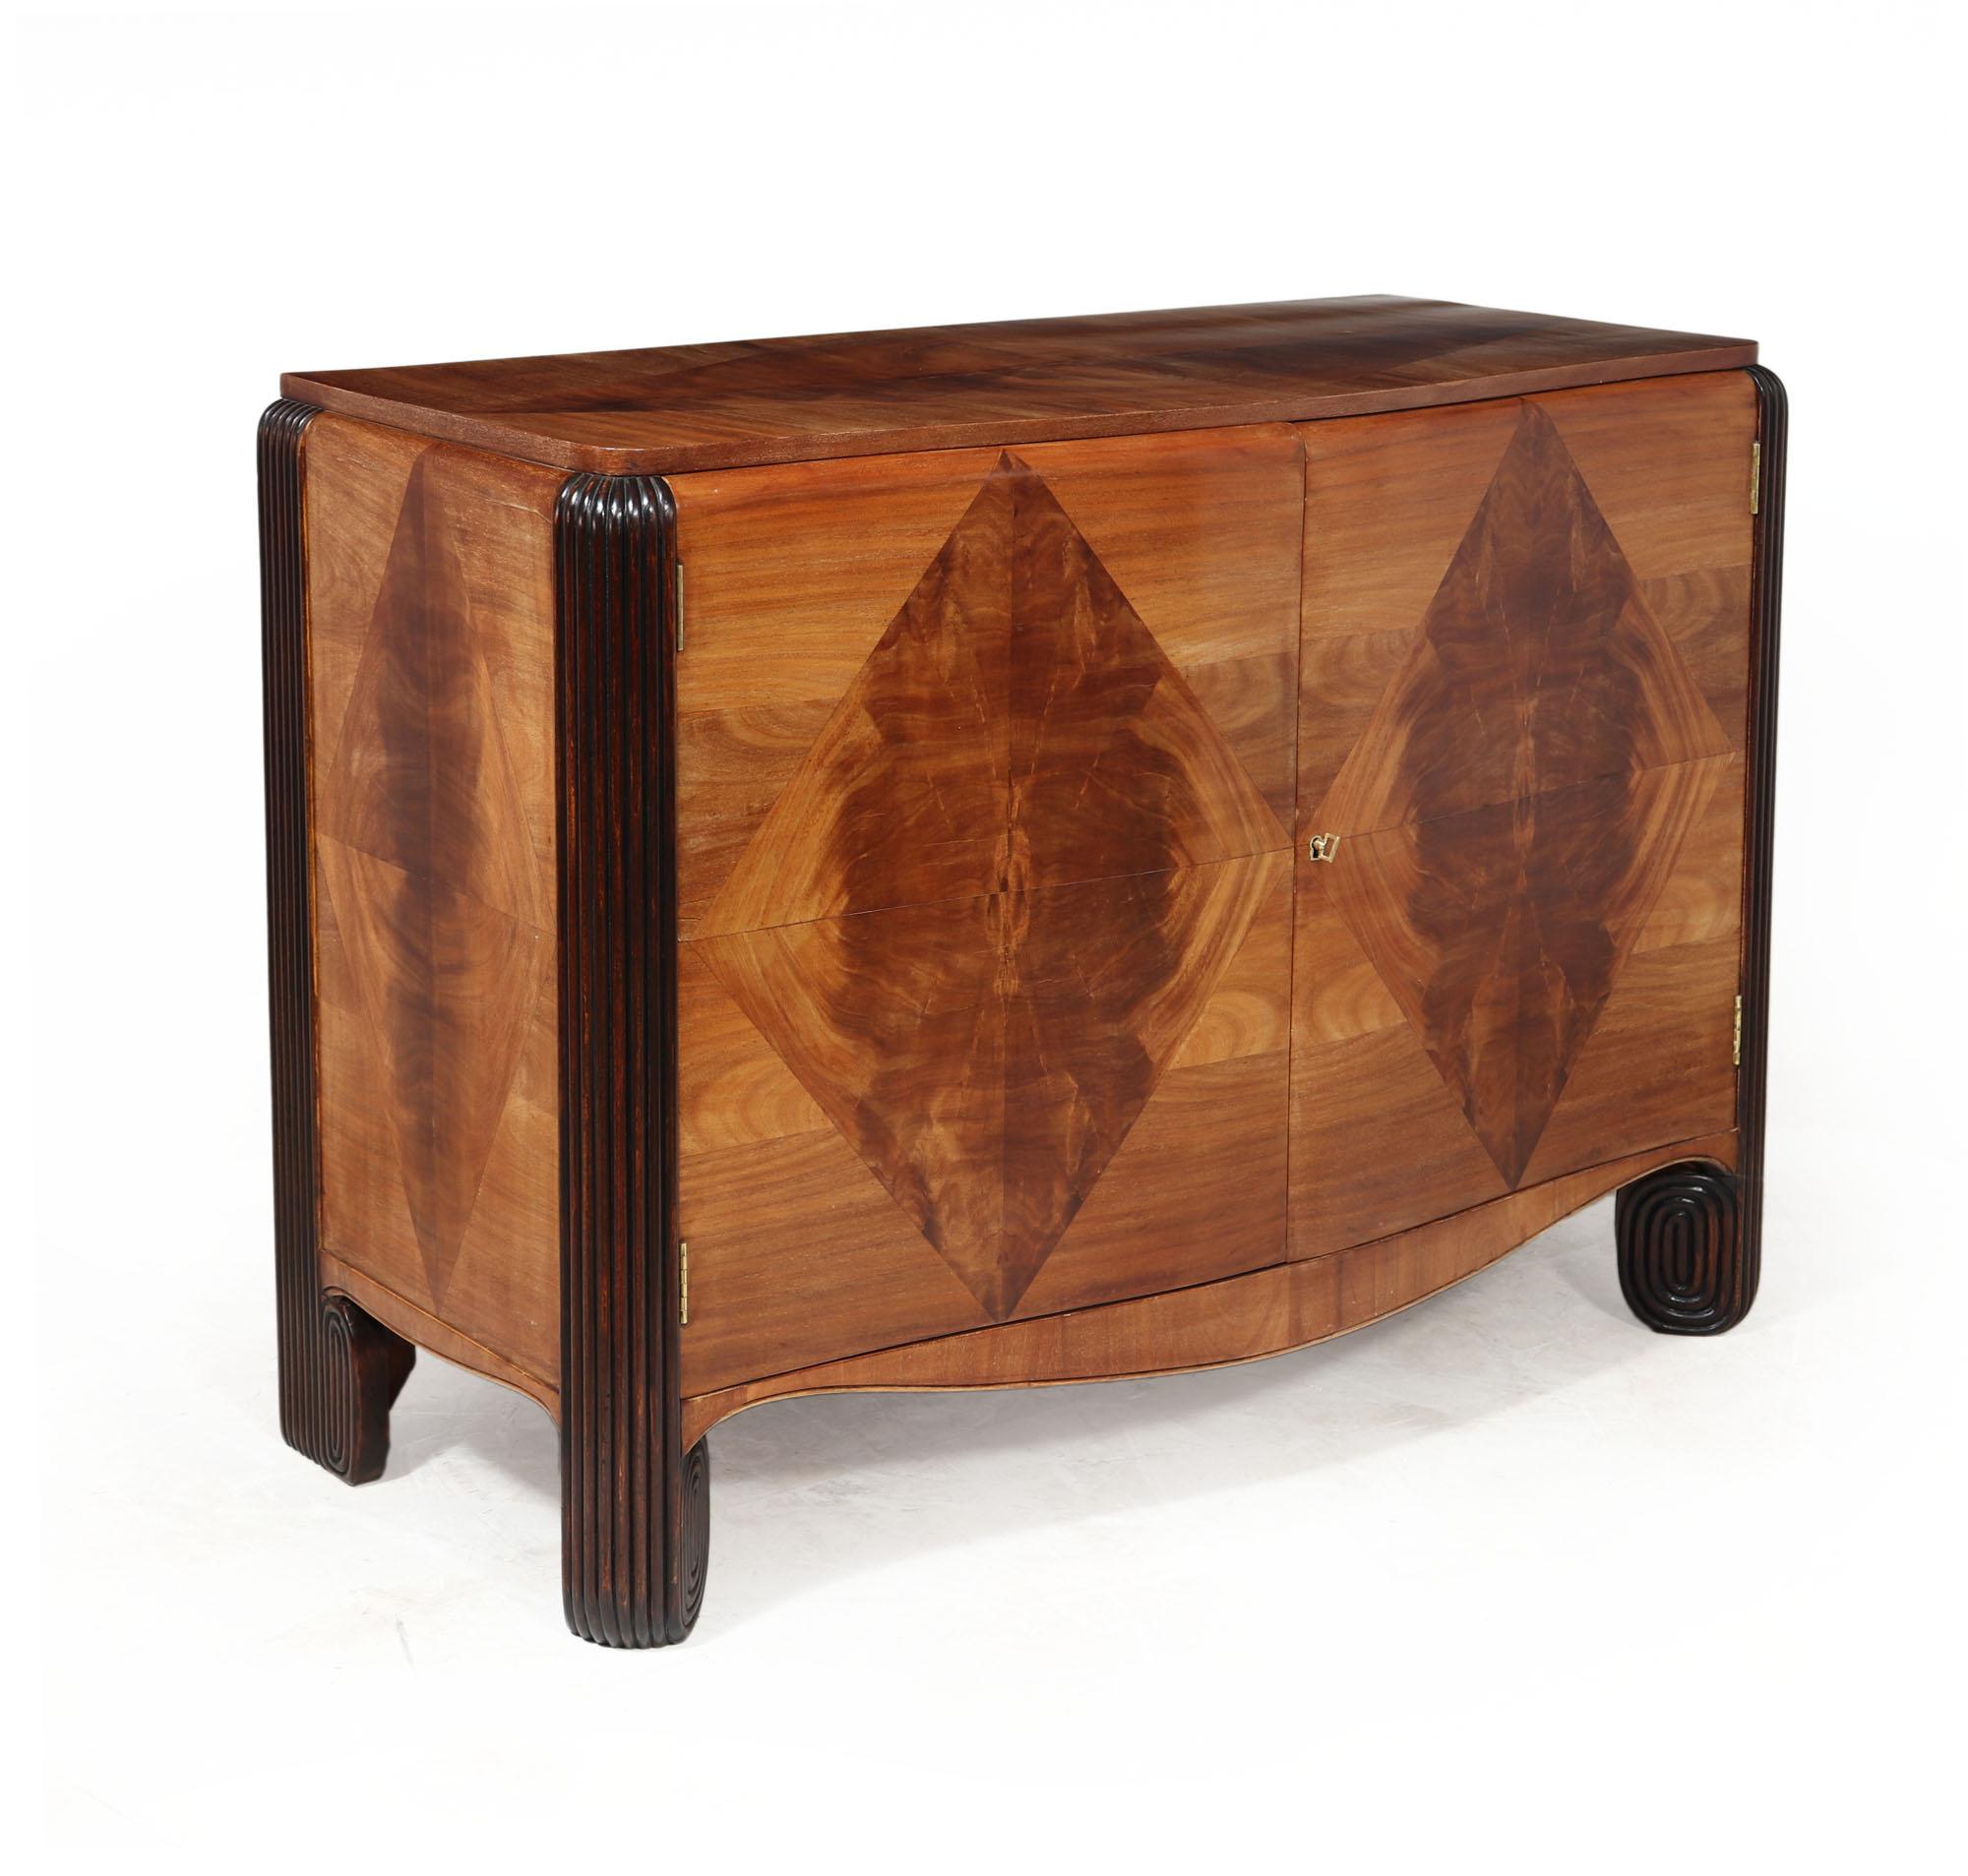 WALNUT COMMODE BY MICHEL DUFET
An exceptional and rare commode by Michel Dufet produced in France in c1925, in Walnut on Oak, having inlayed contrasting walnut in diamond form, reeded leg uprights, serpentine shaped front with for drawers behind